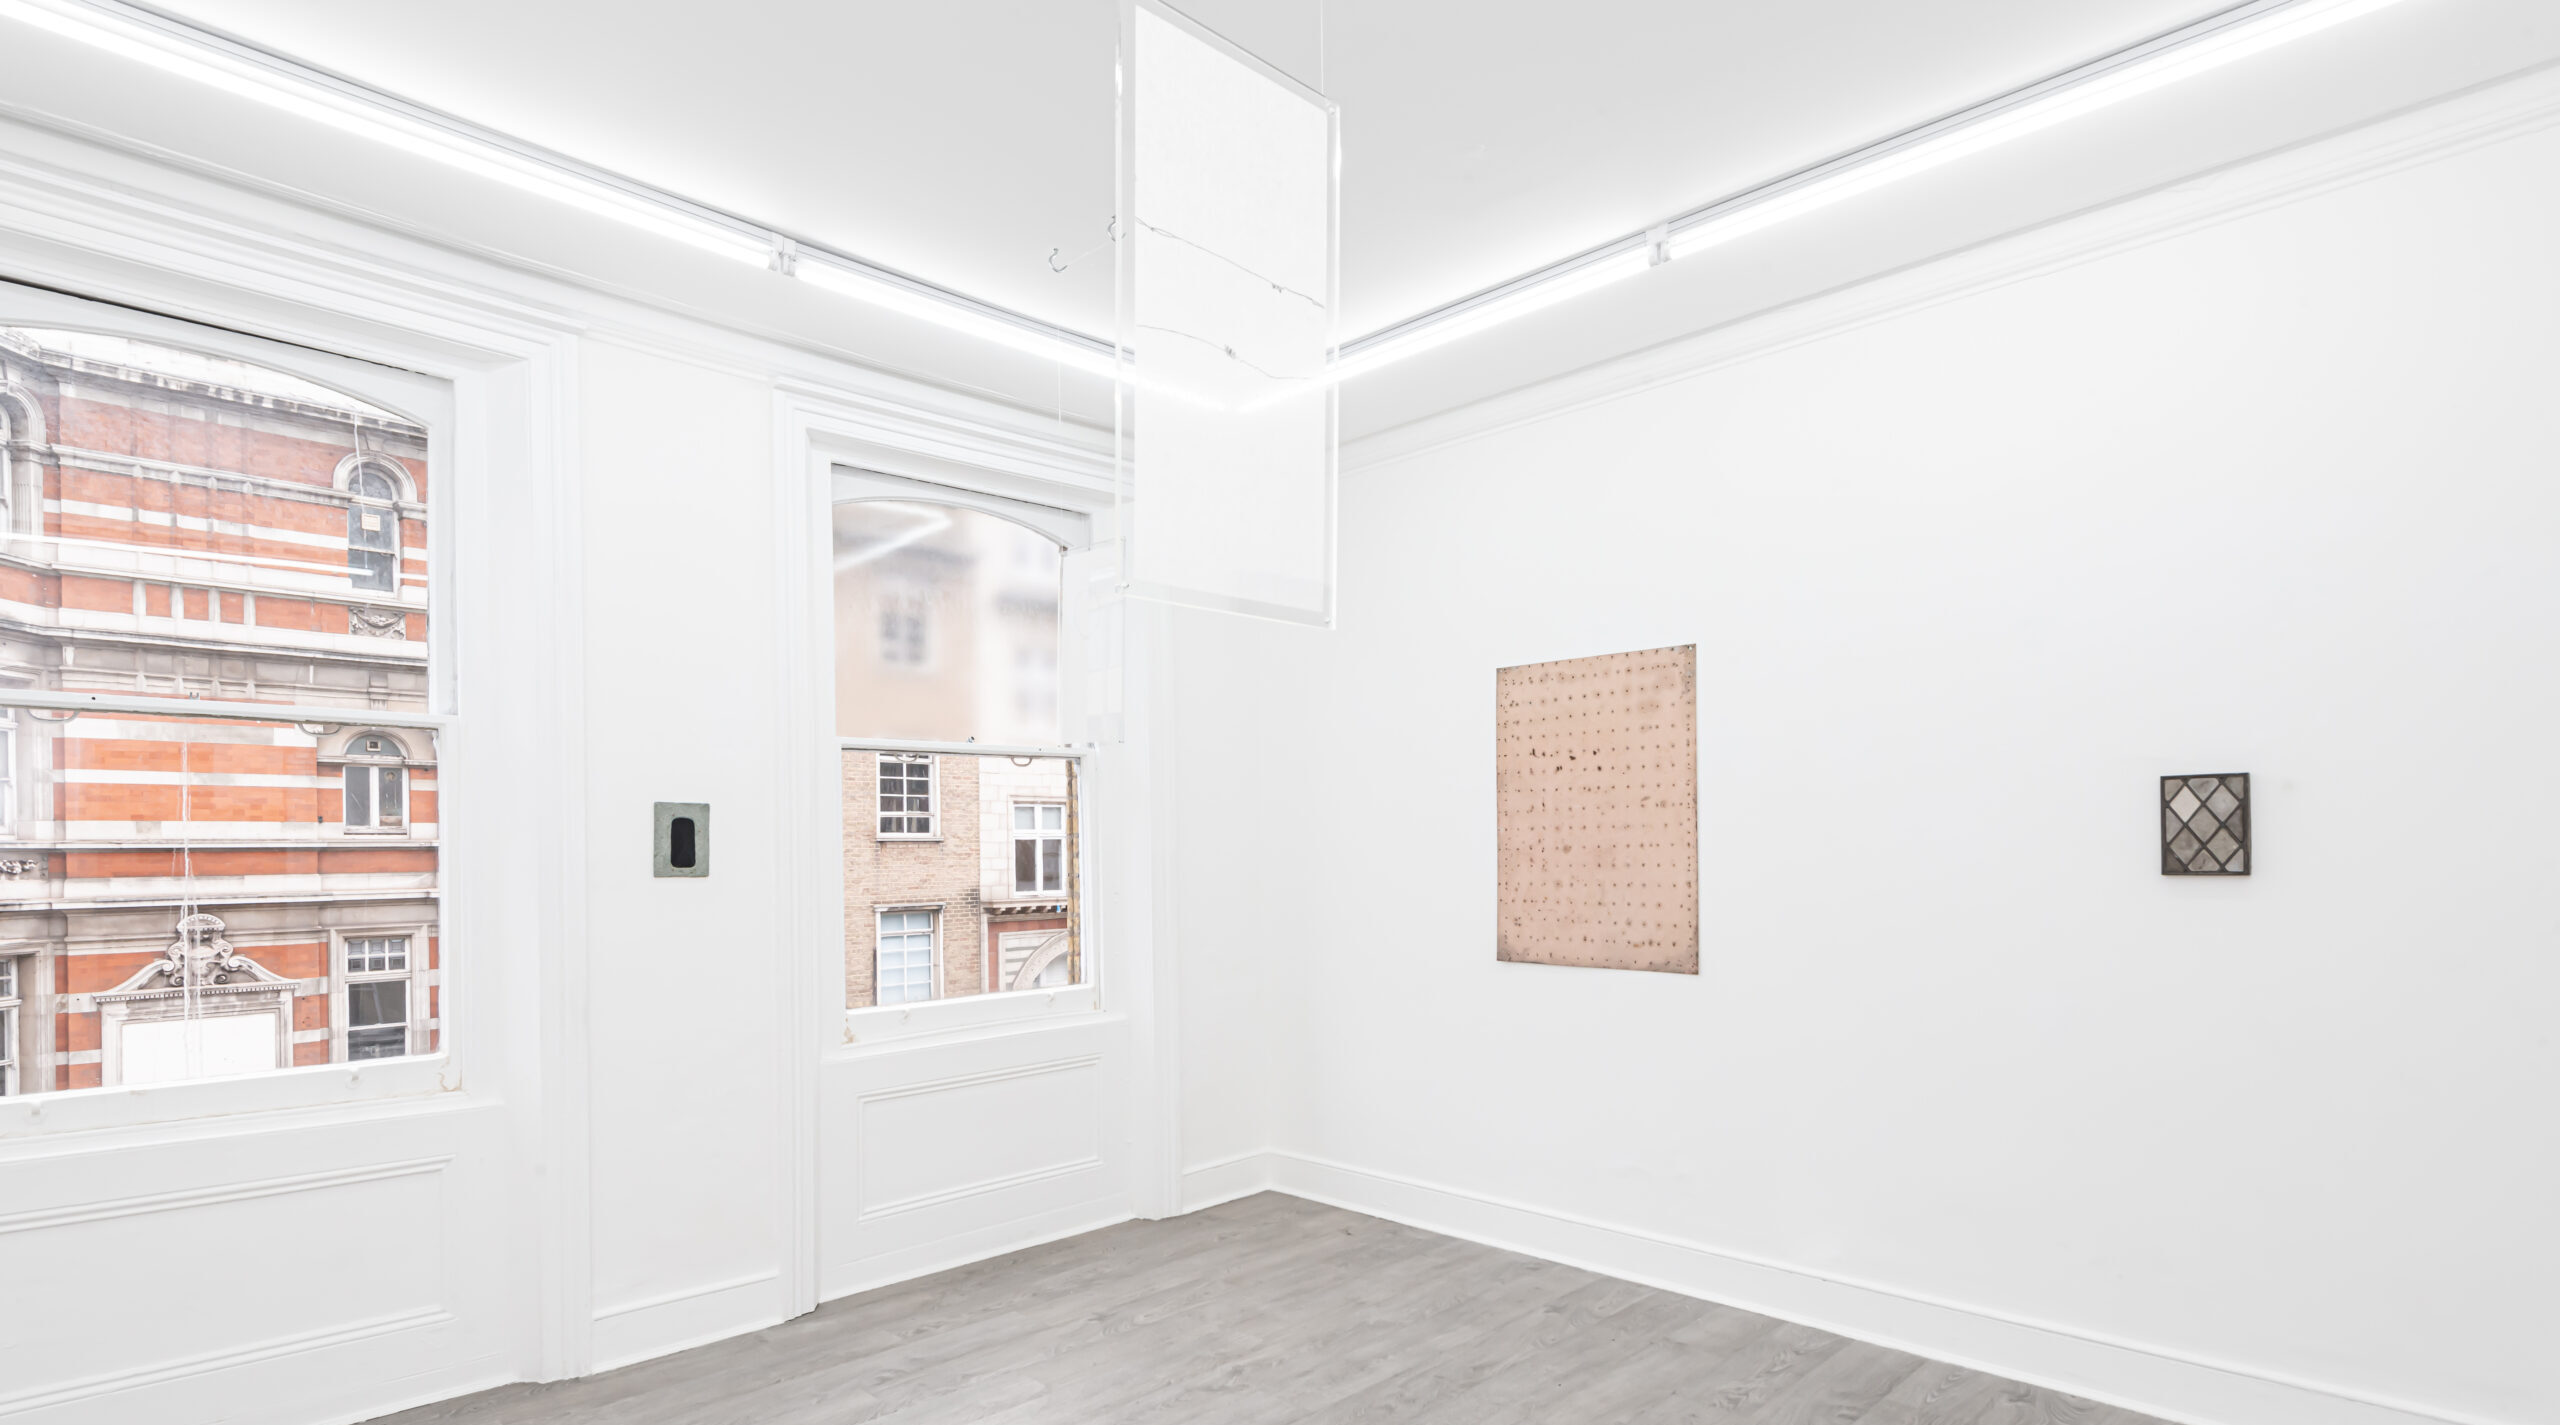 From transparent juices; a group show including work by Victoria Adam, Tom Bull, Anna Paterson and Mira Schendel. Curated by Laura Gonzalez at Lungley Gallery, London.